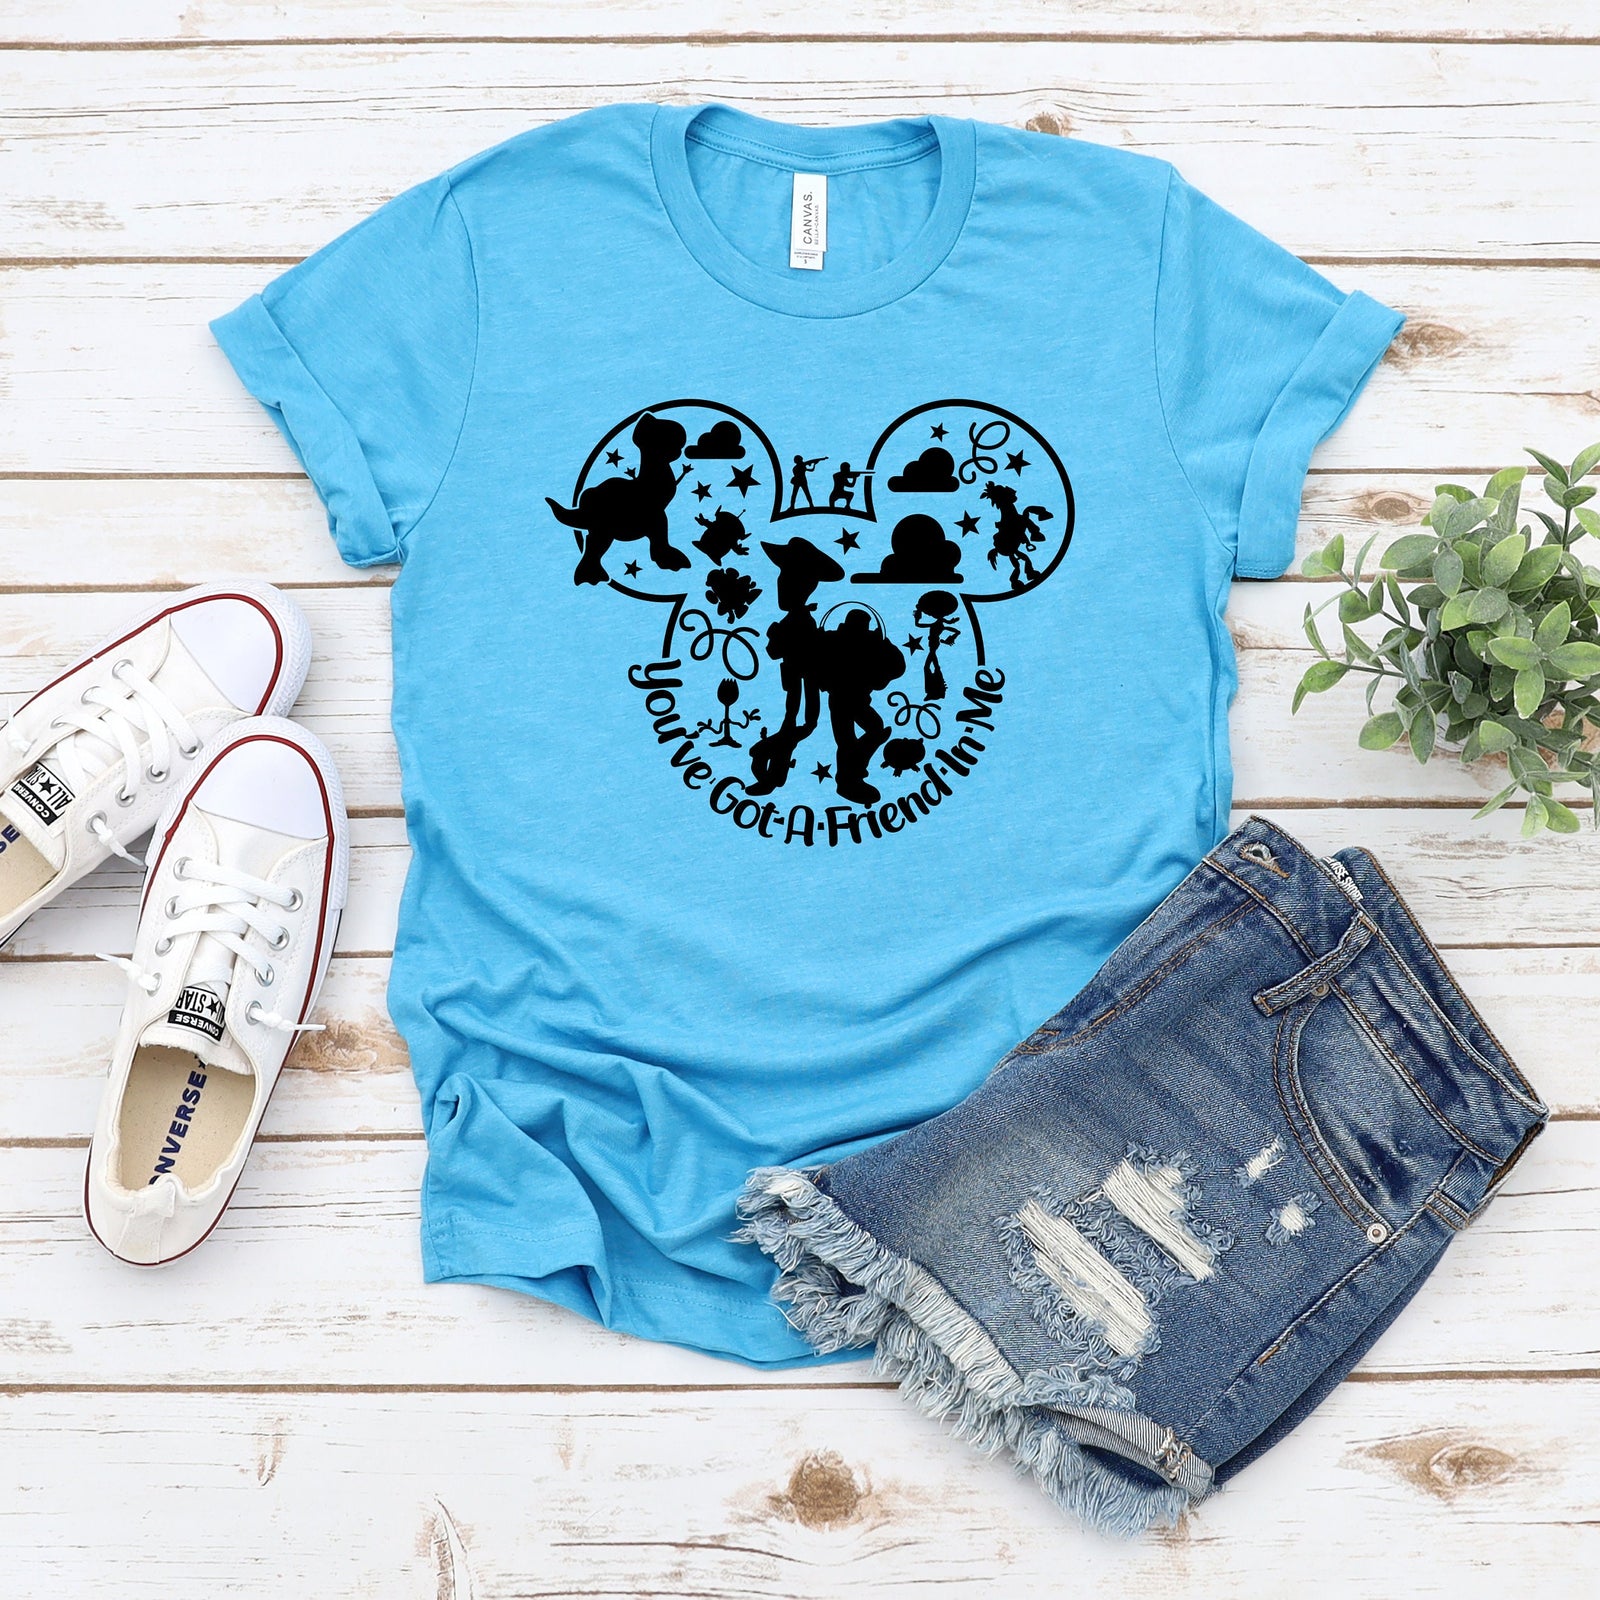 Toy Story Adult Unisex T Shirt - You've Got a Friend in Me - Characters - Disney Shirt